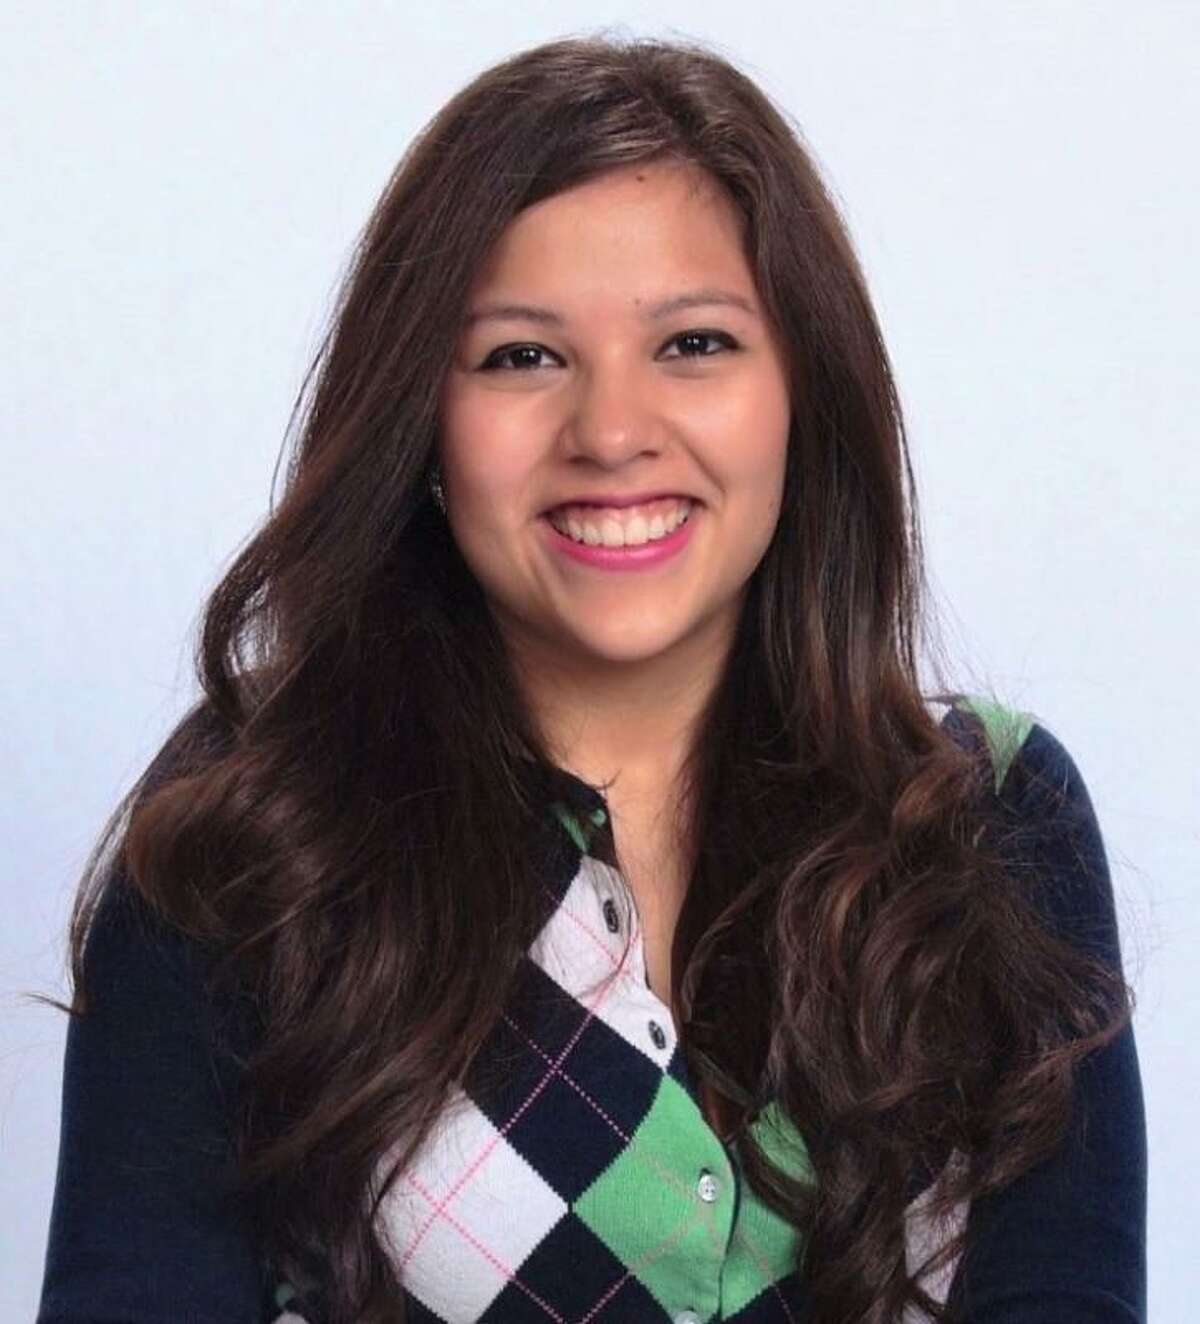 Chosen to receive a $10,000 Texas Medical Association Minority Scholarship, longtime Katy resident Sally Acebo plans to study medicine in the fall at the Sam Houston University College of Osteopathic Medicine in Huntsville. She wants to become a pediatrician.